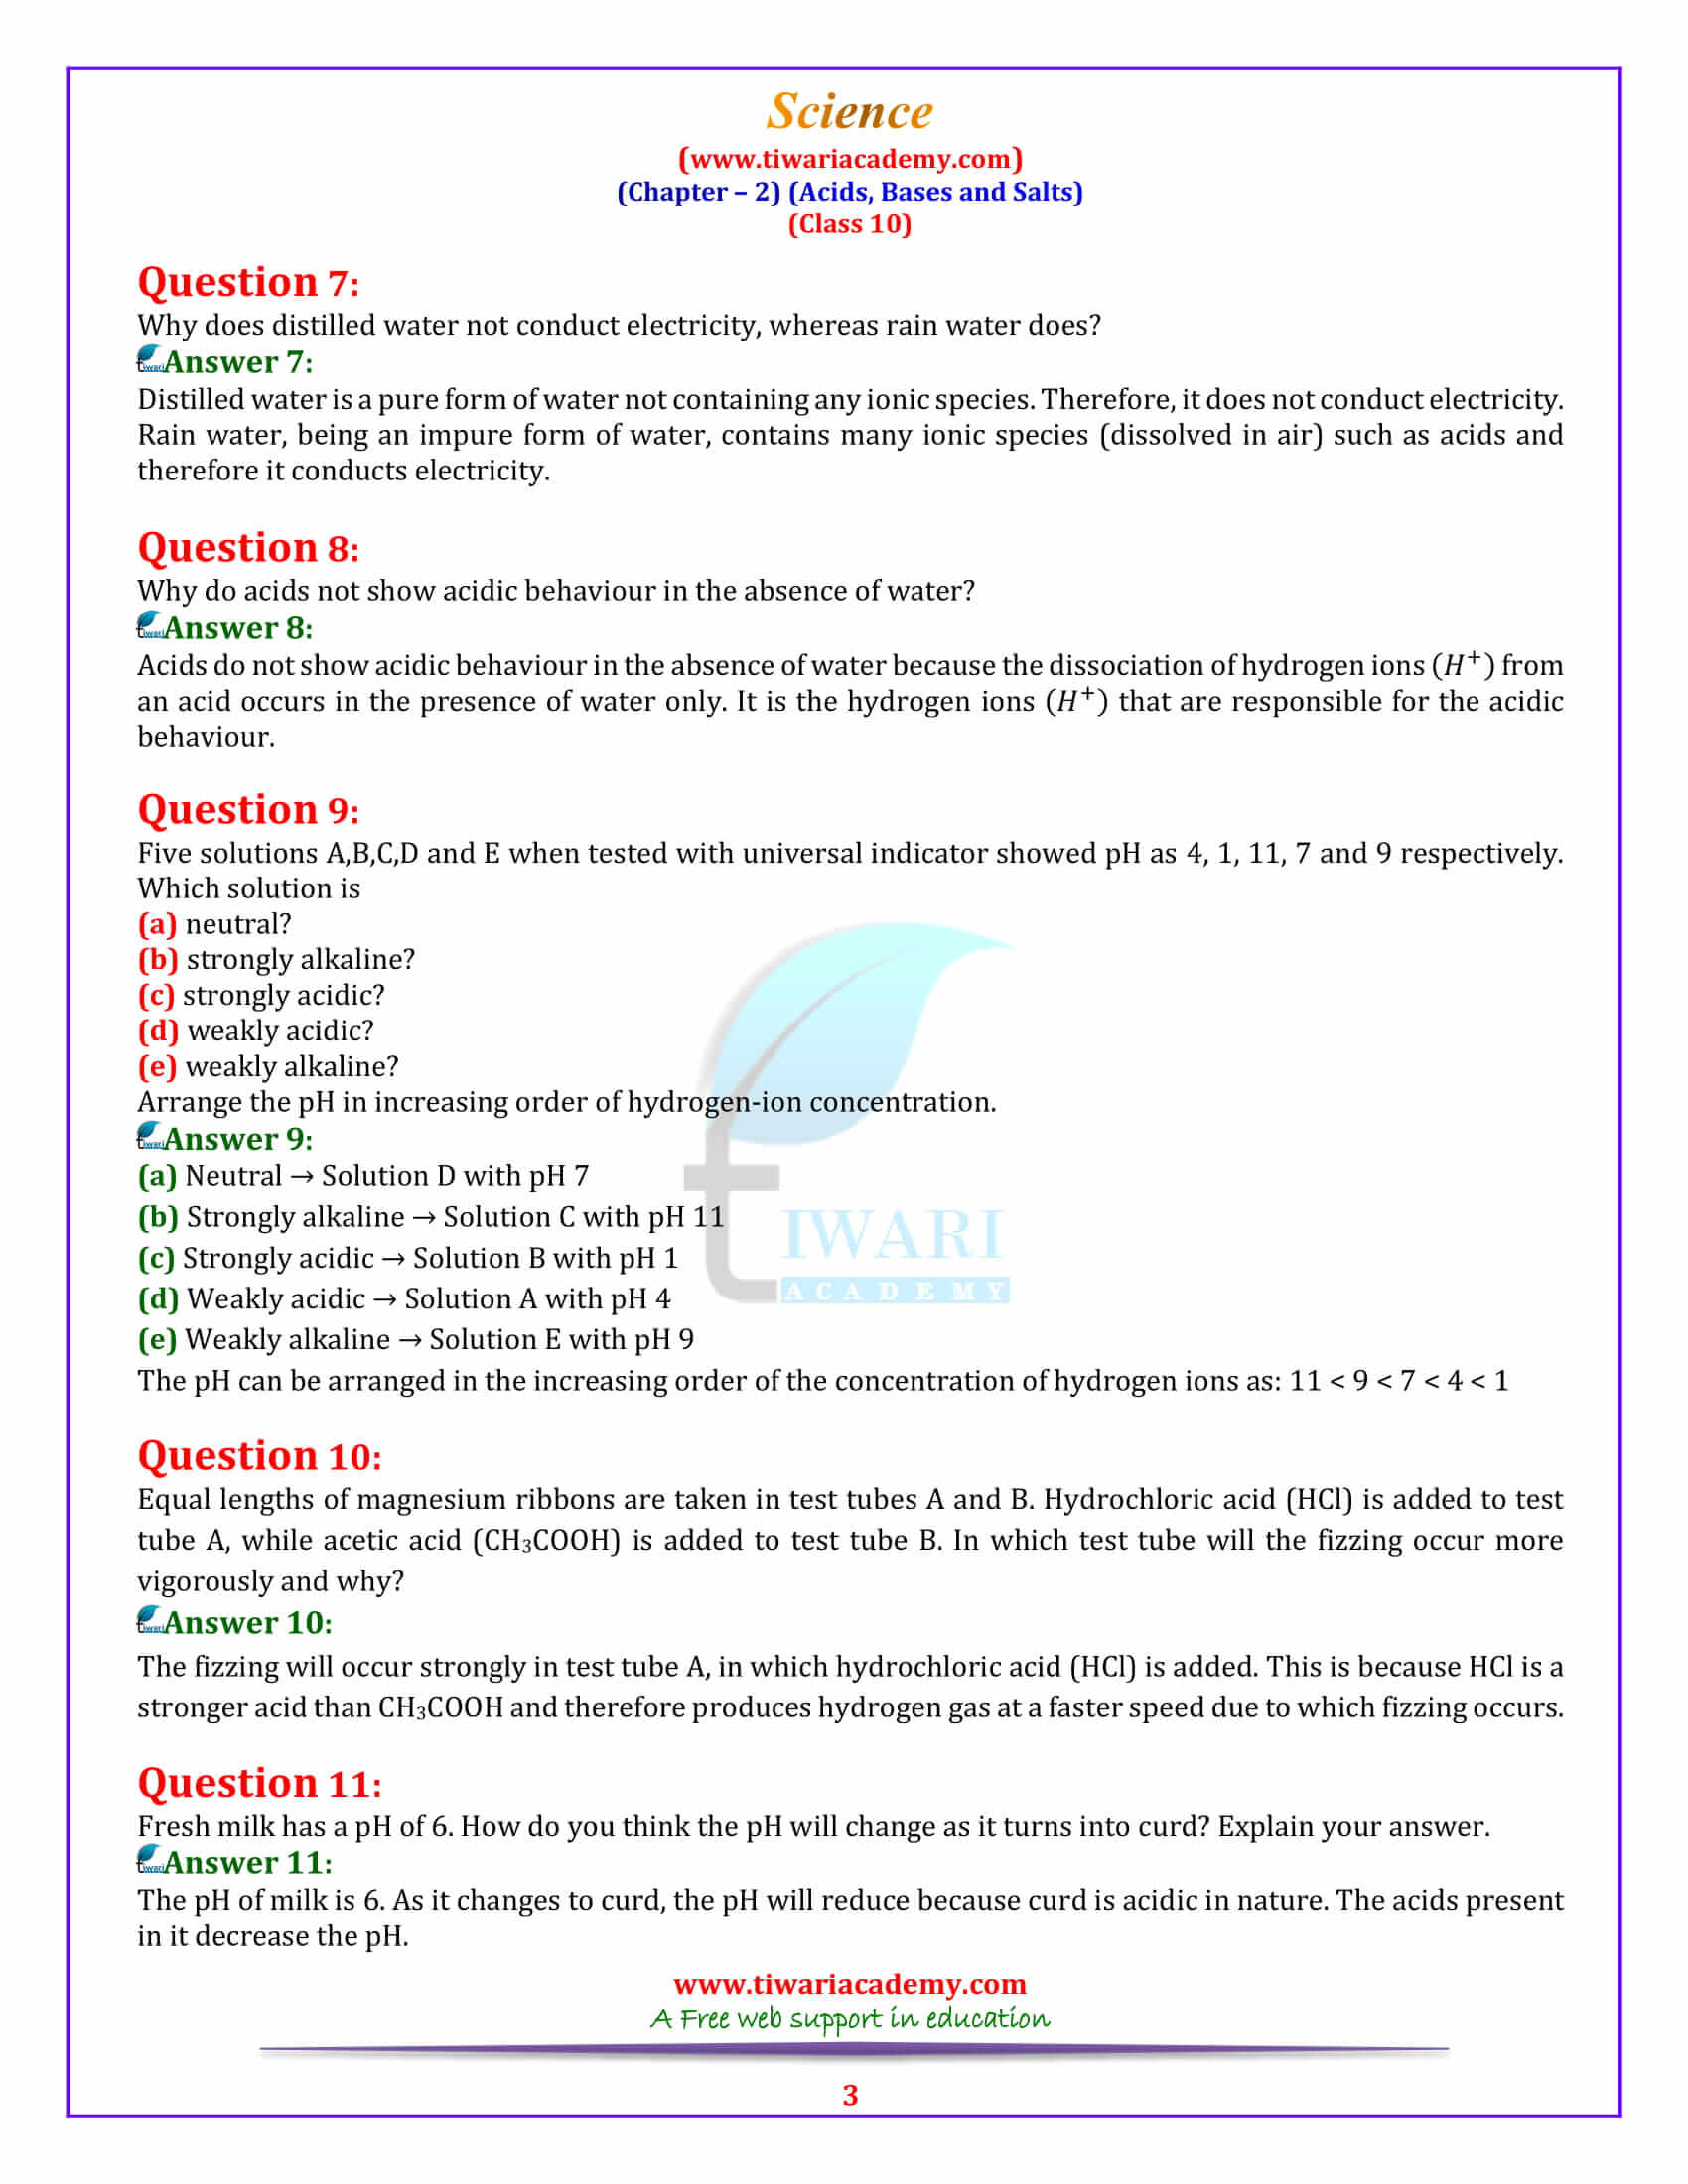 10 Science Chapter 2 Acids, Bases and Salts Exercises answers in english medium